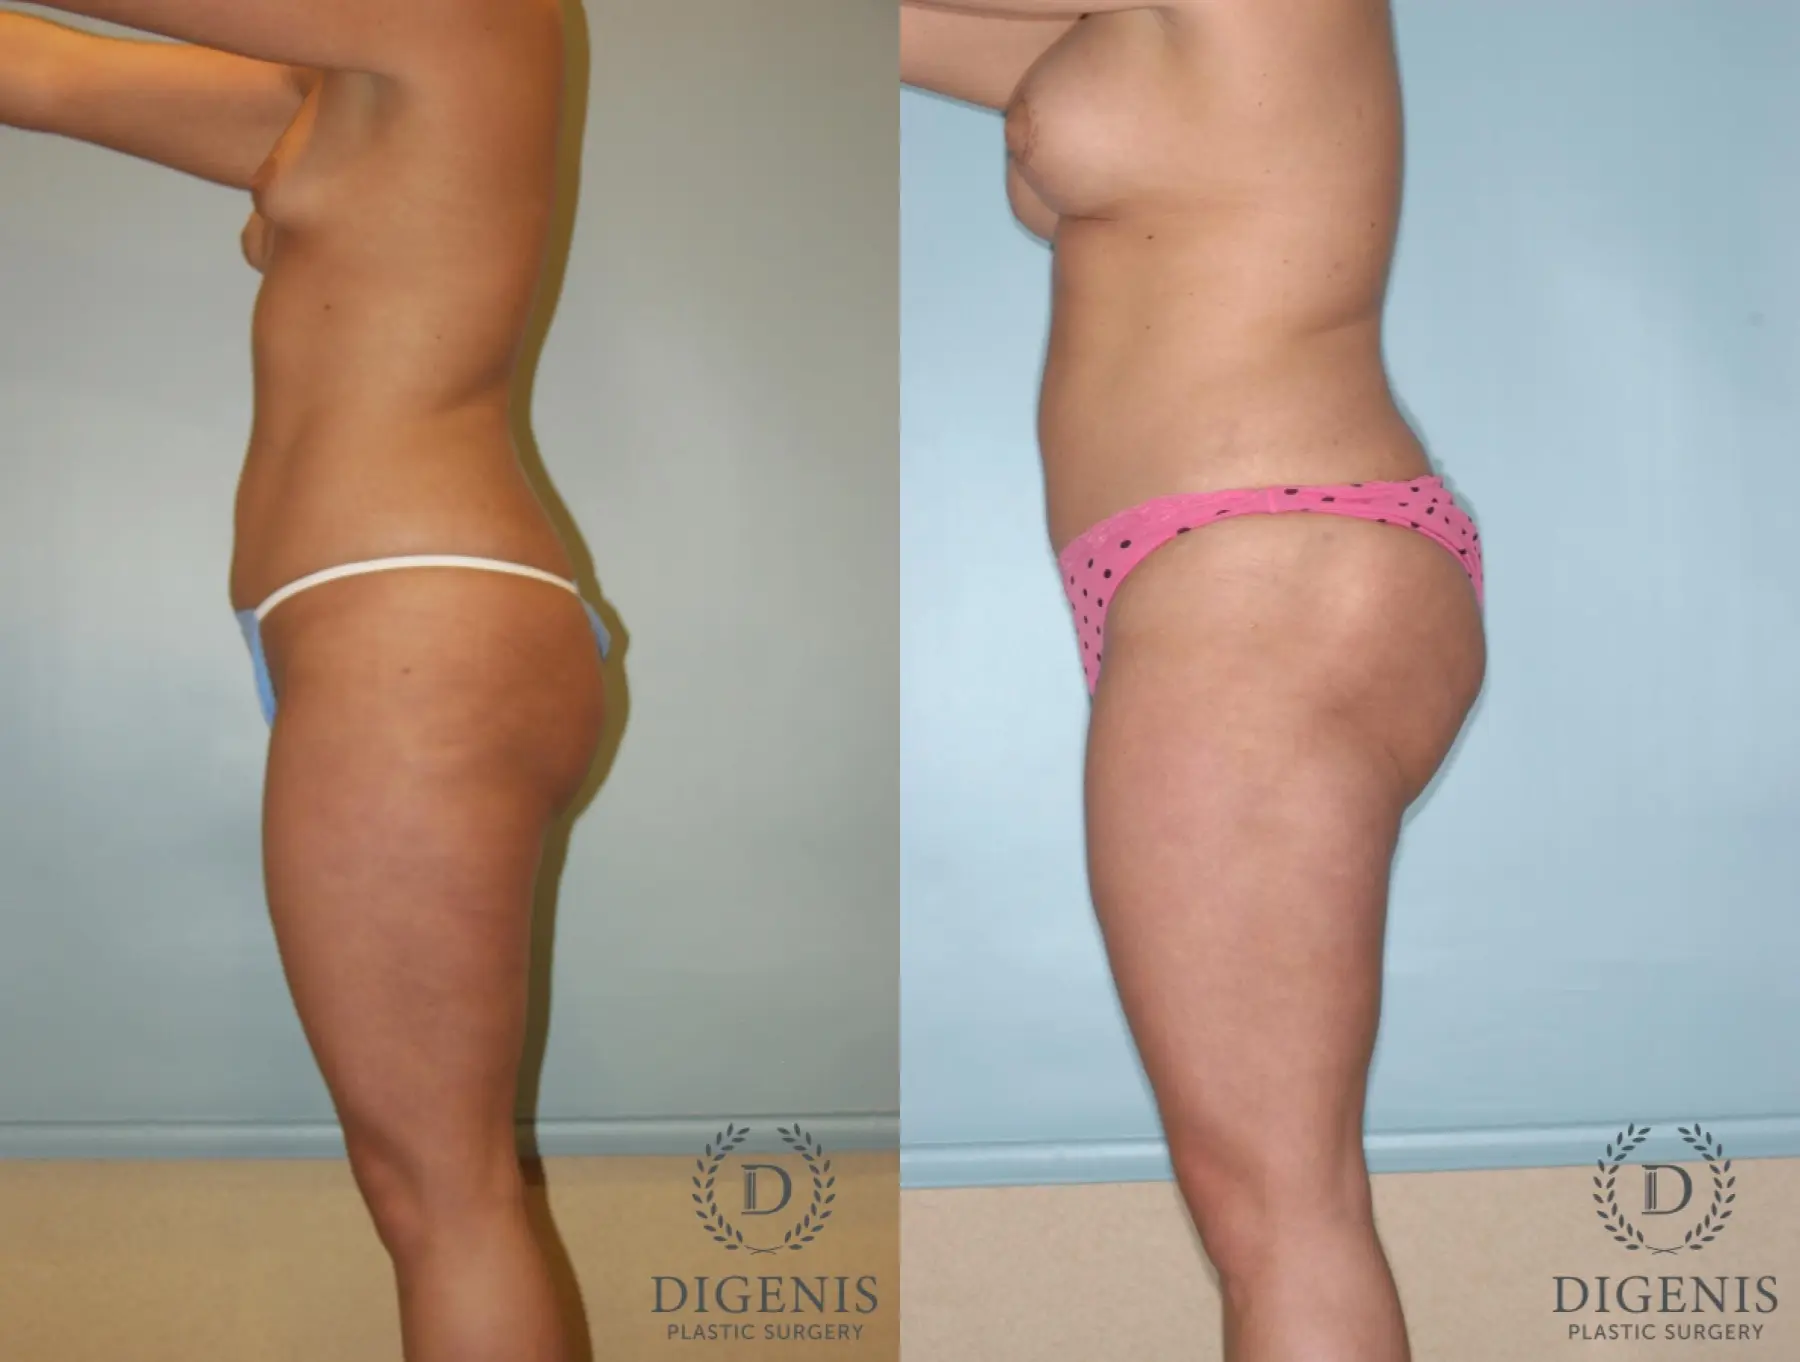 Liposuction: Patient 5 - Before and After 4